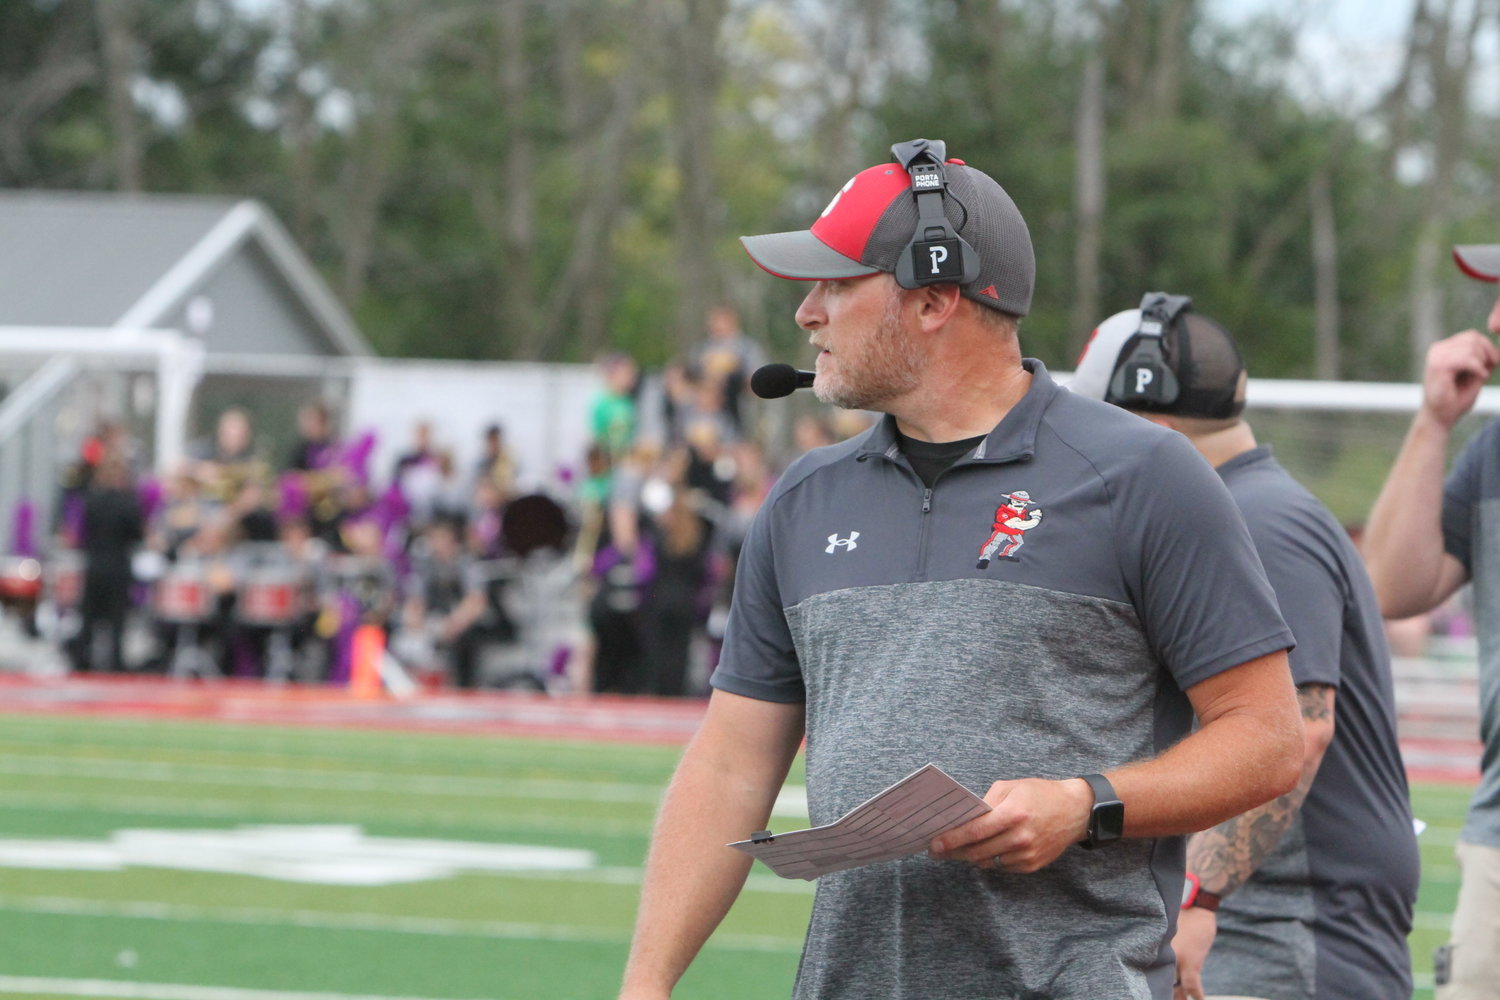 Southmont coach Desson Hannum is now the winningest coach in Southmont school history with his 71st career win.